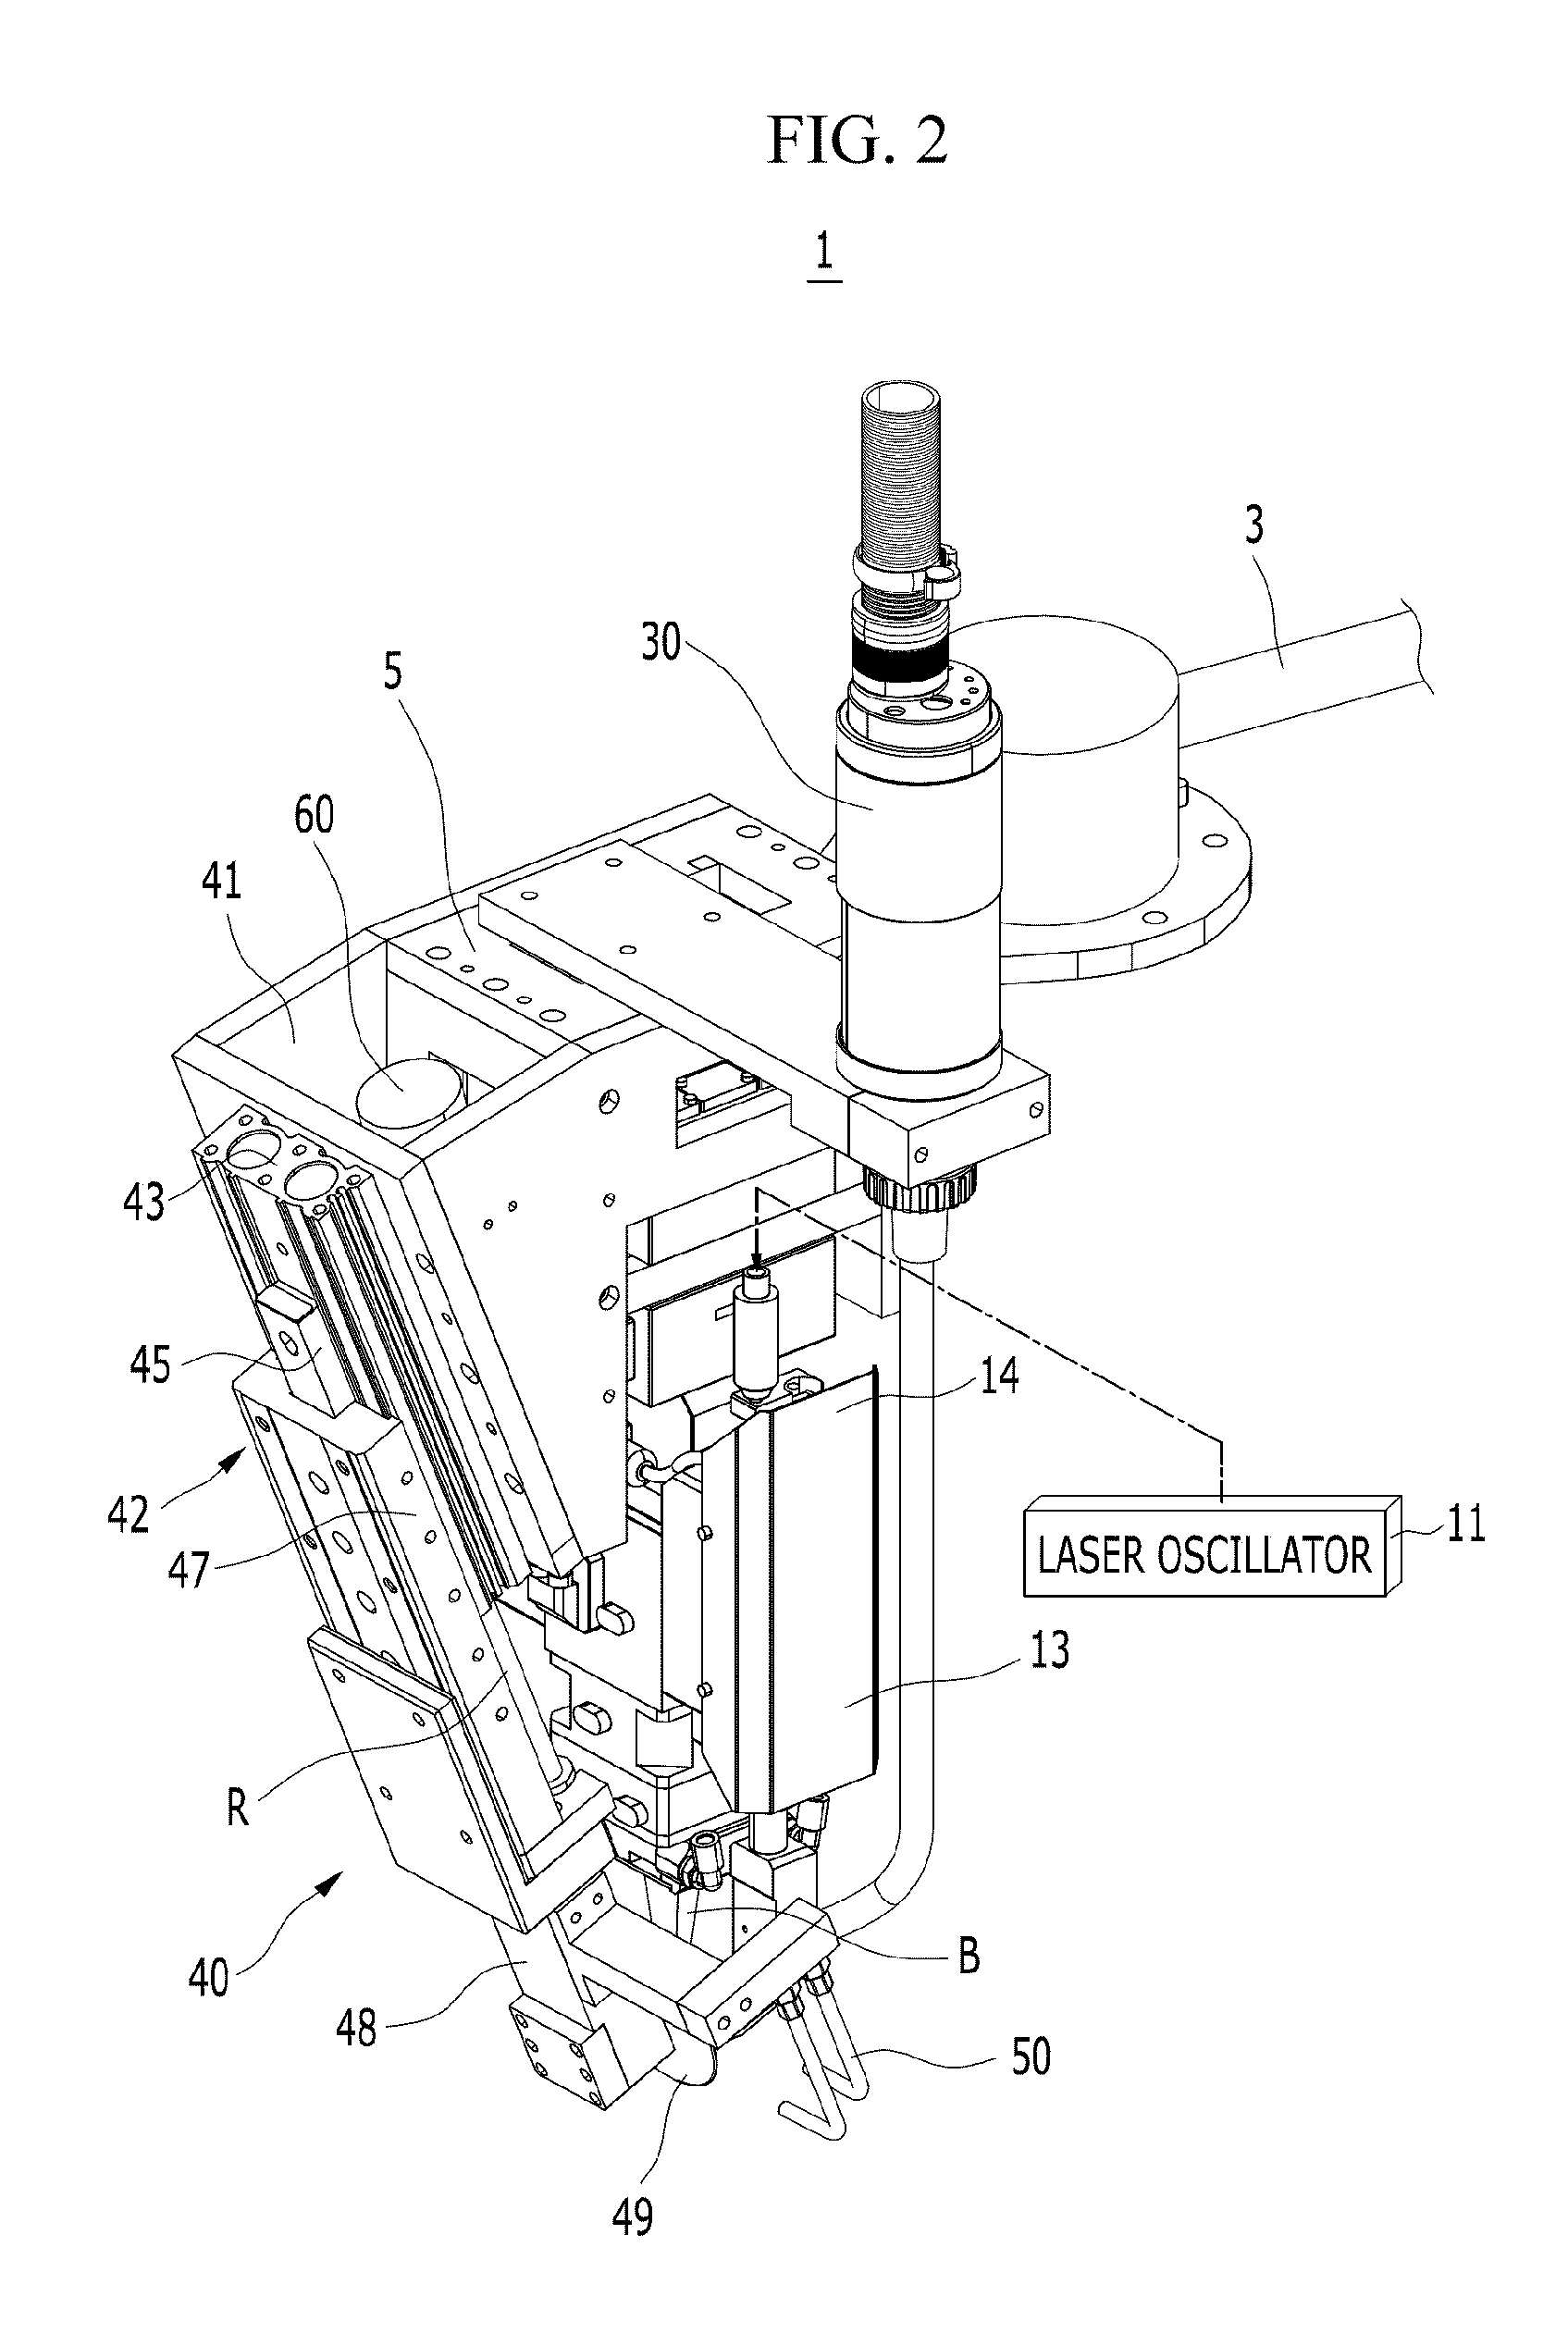 Laser apparatus for welding